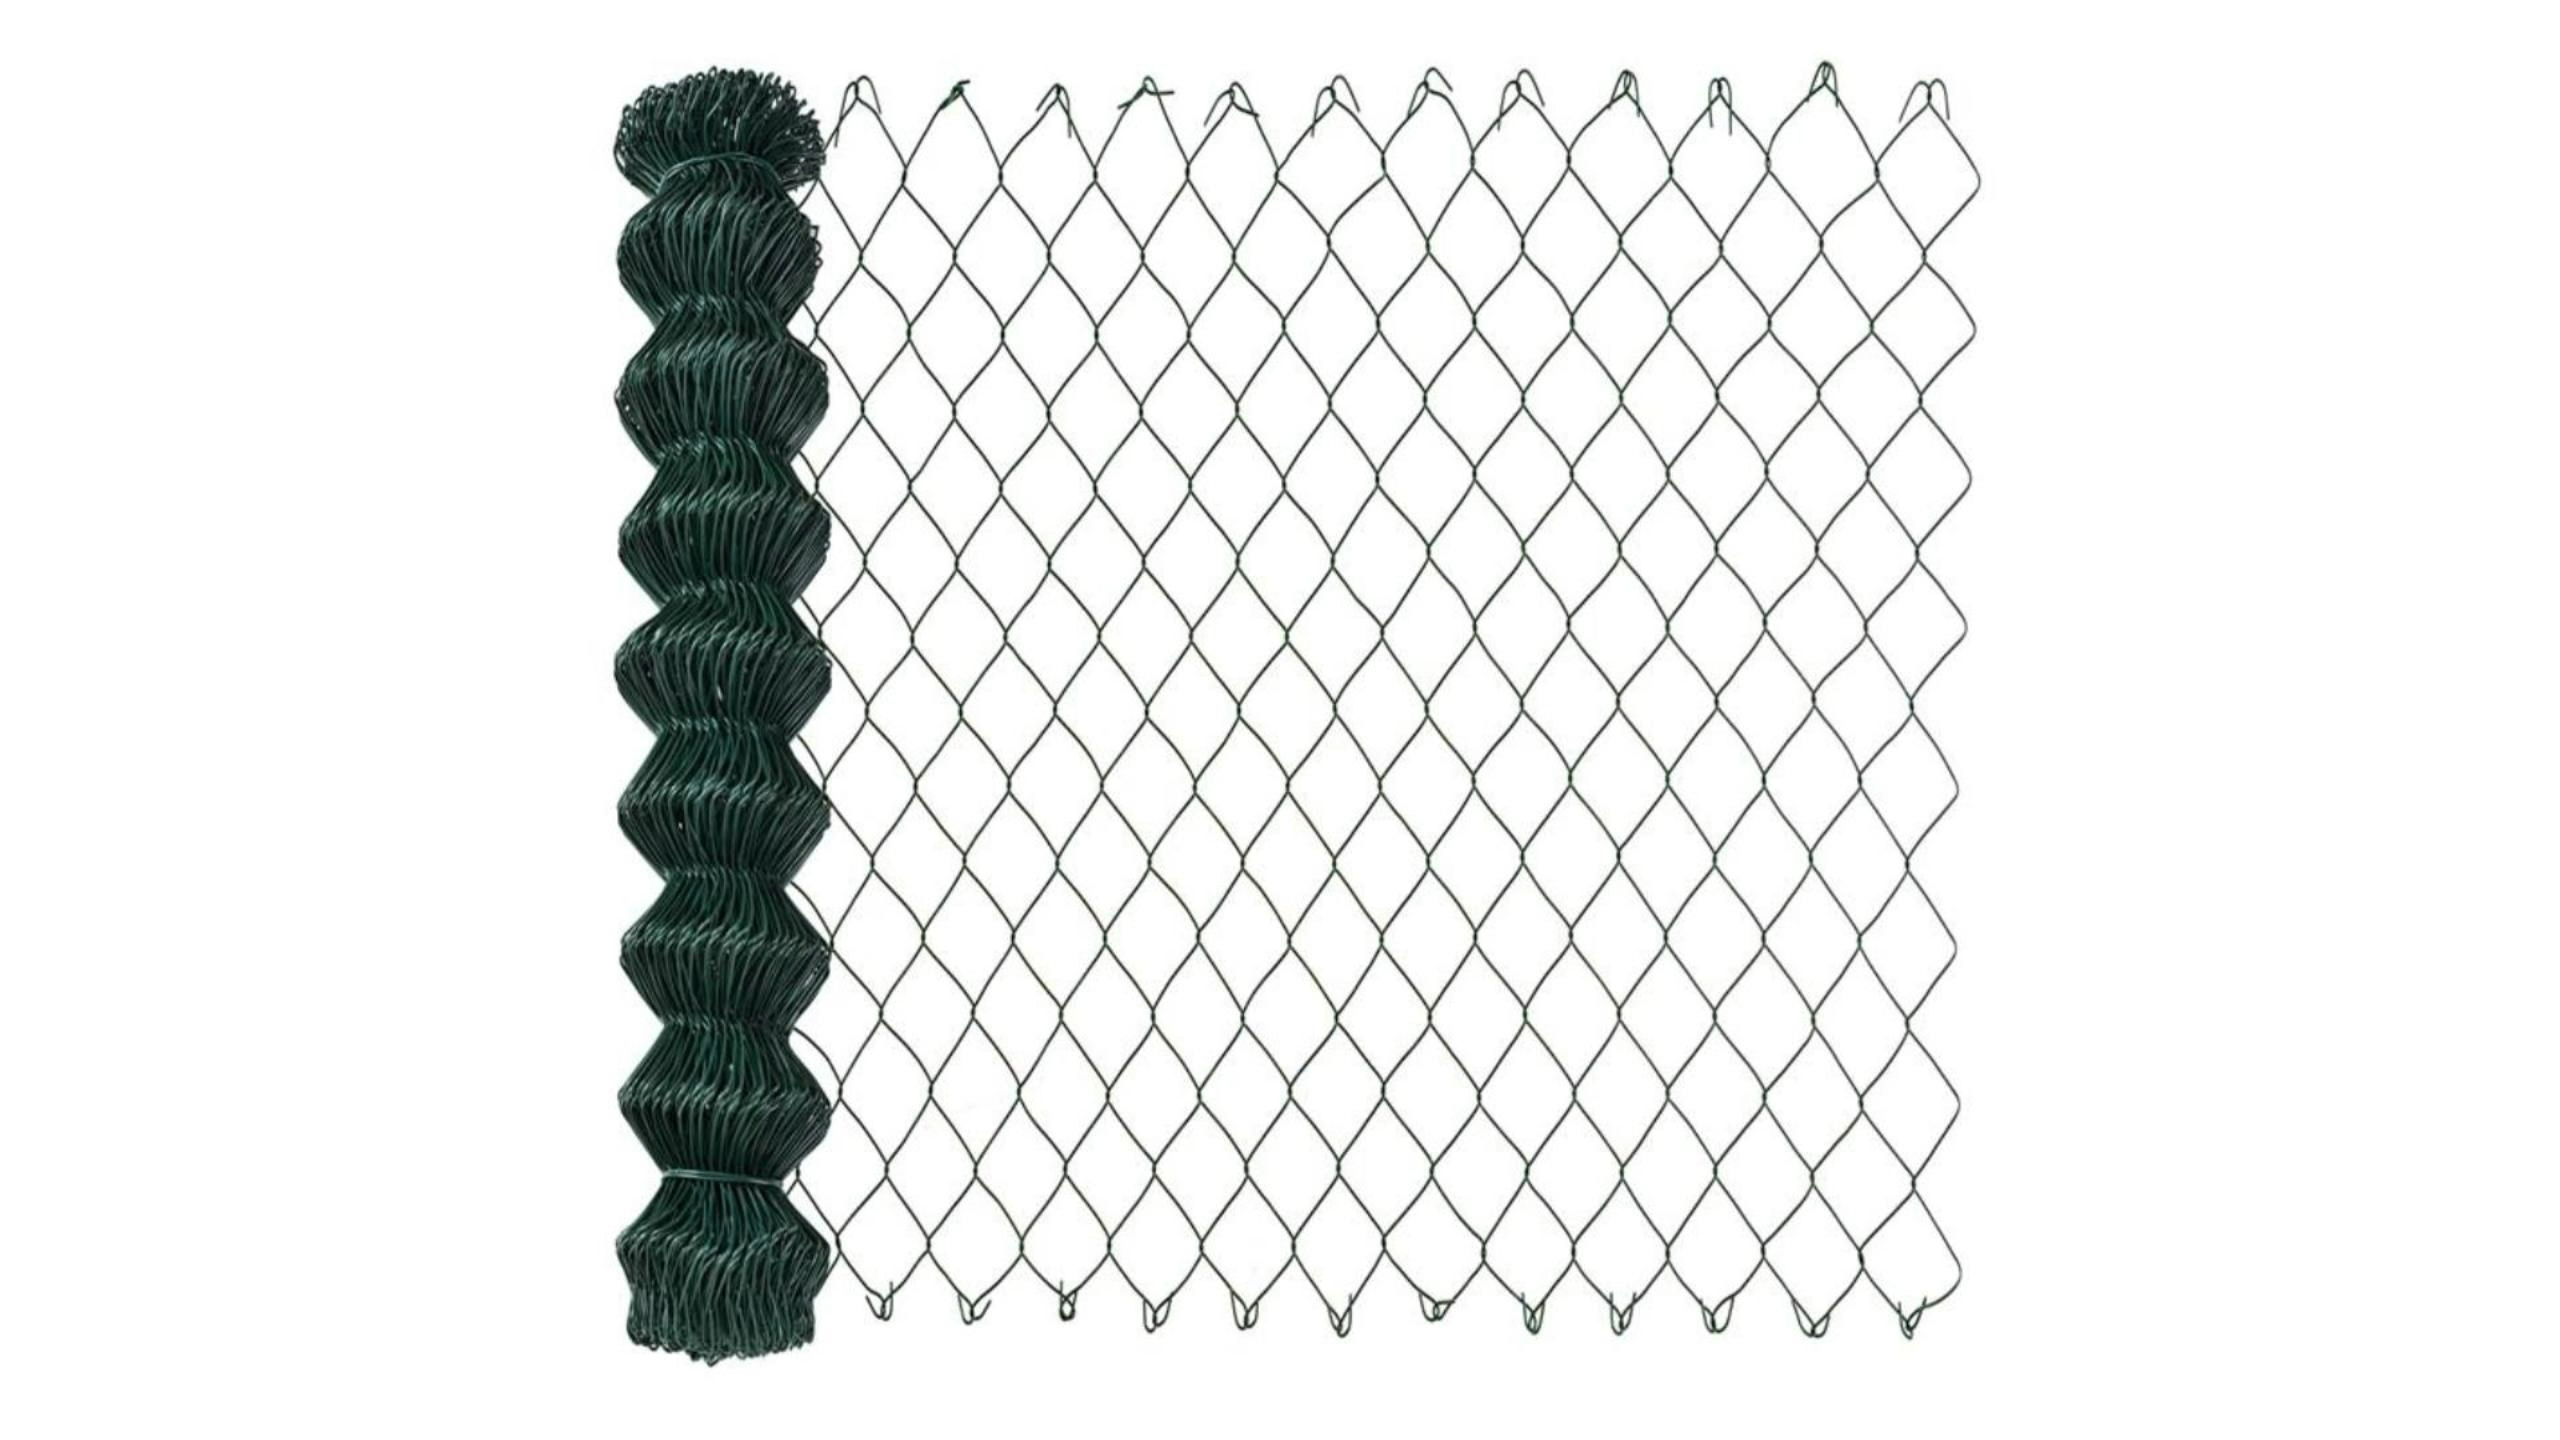 PVC coated black galvanized wire braided 50ft chain link fencing Chain Link Fence1